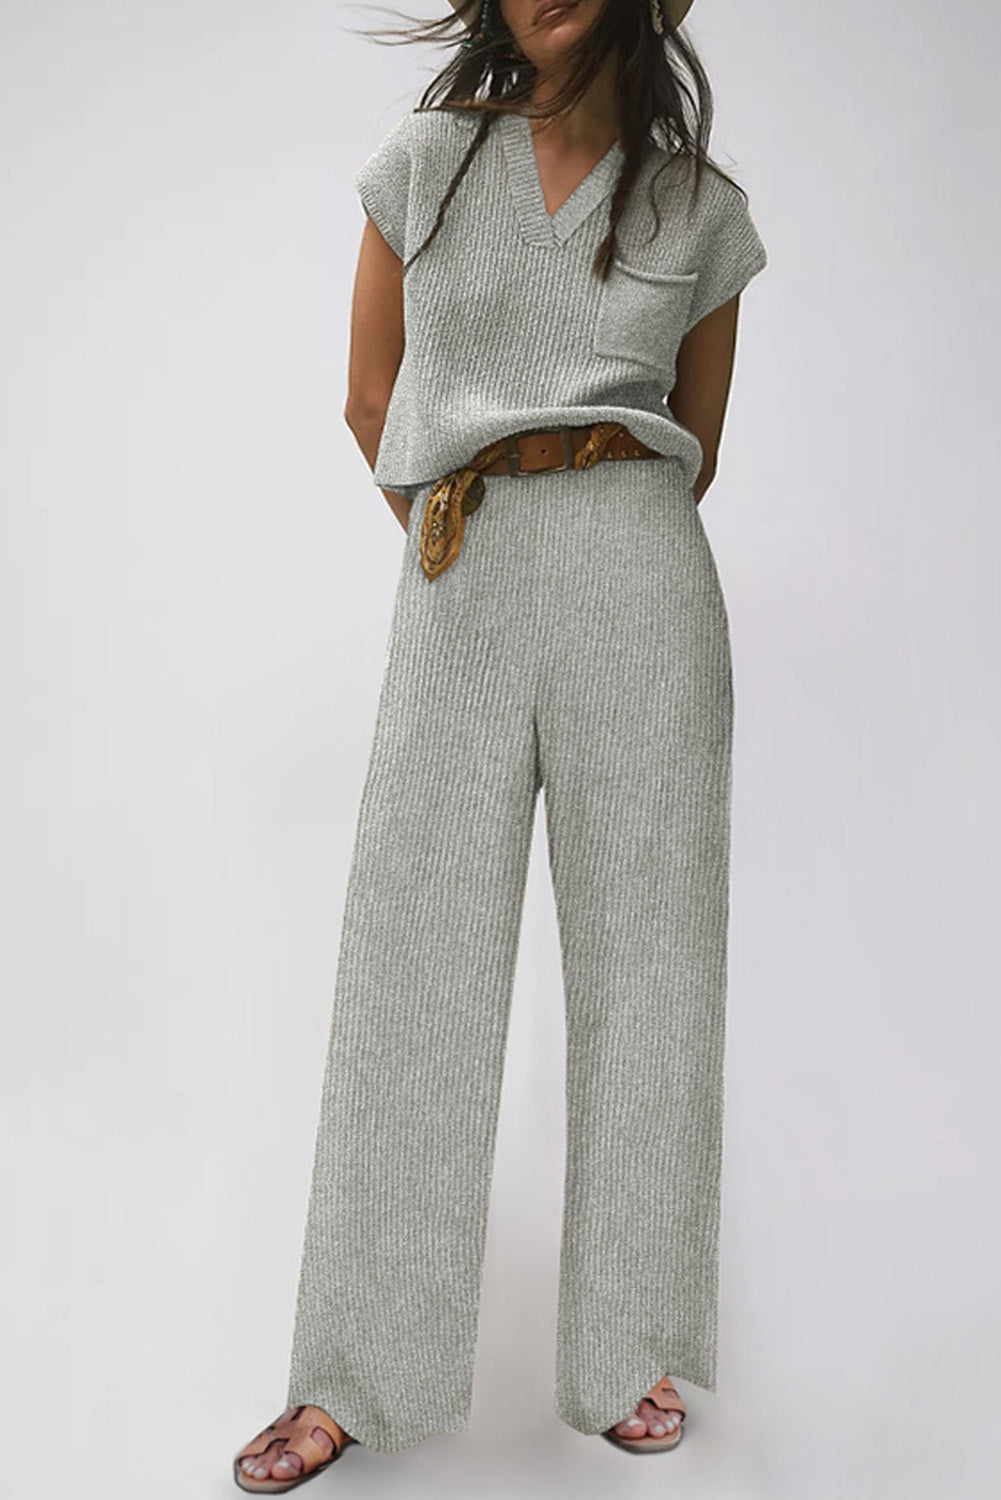 Gray Knitted V Neck Sweater and Casual Pants Set - SELFTRITSS